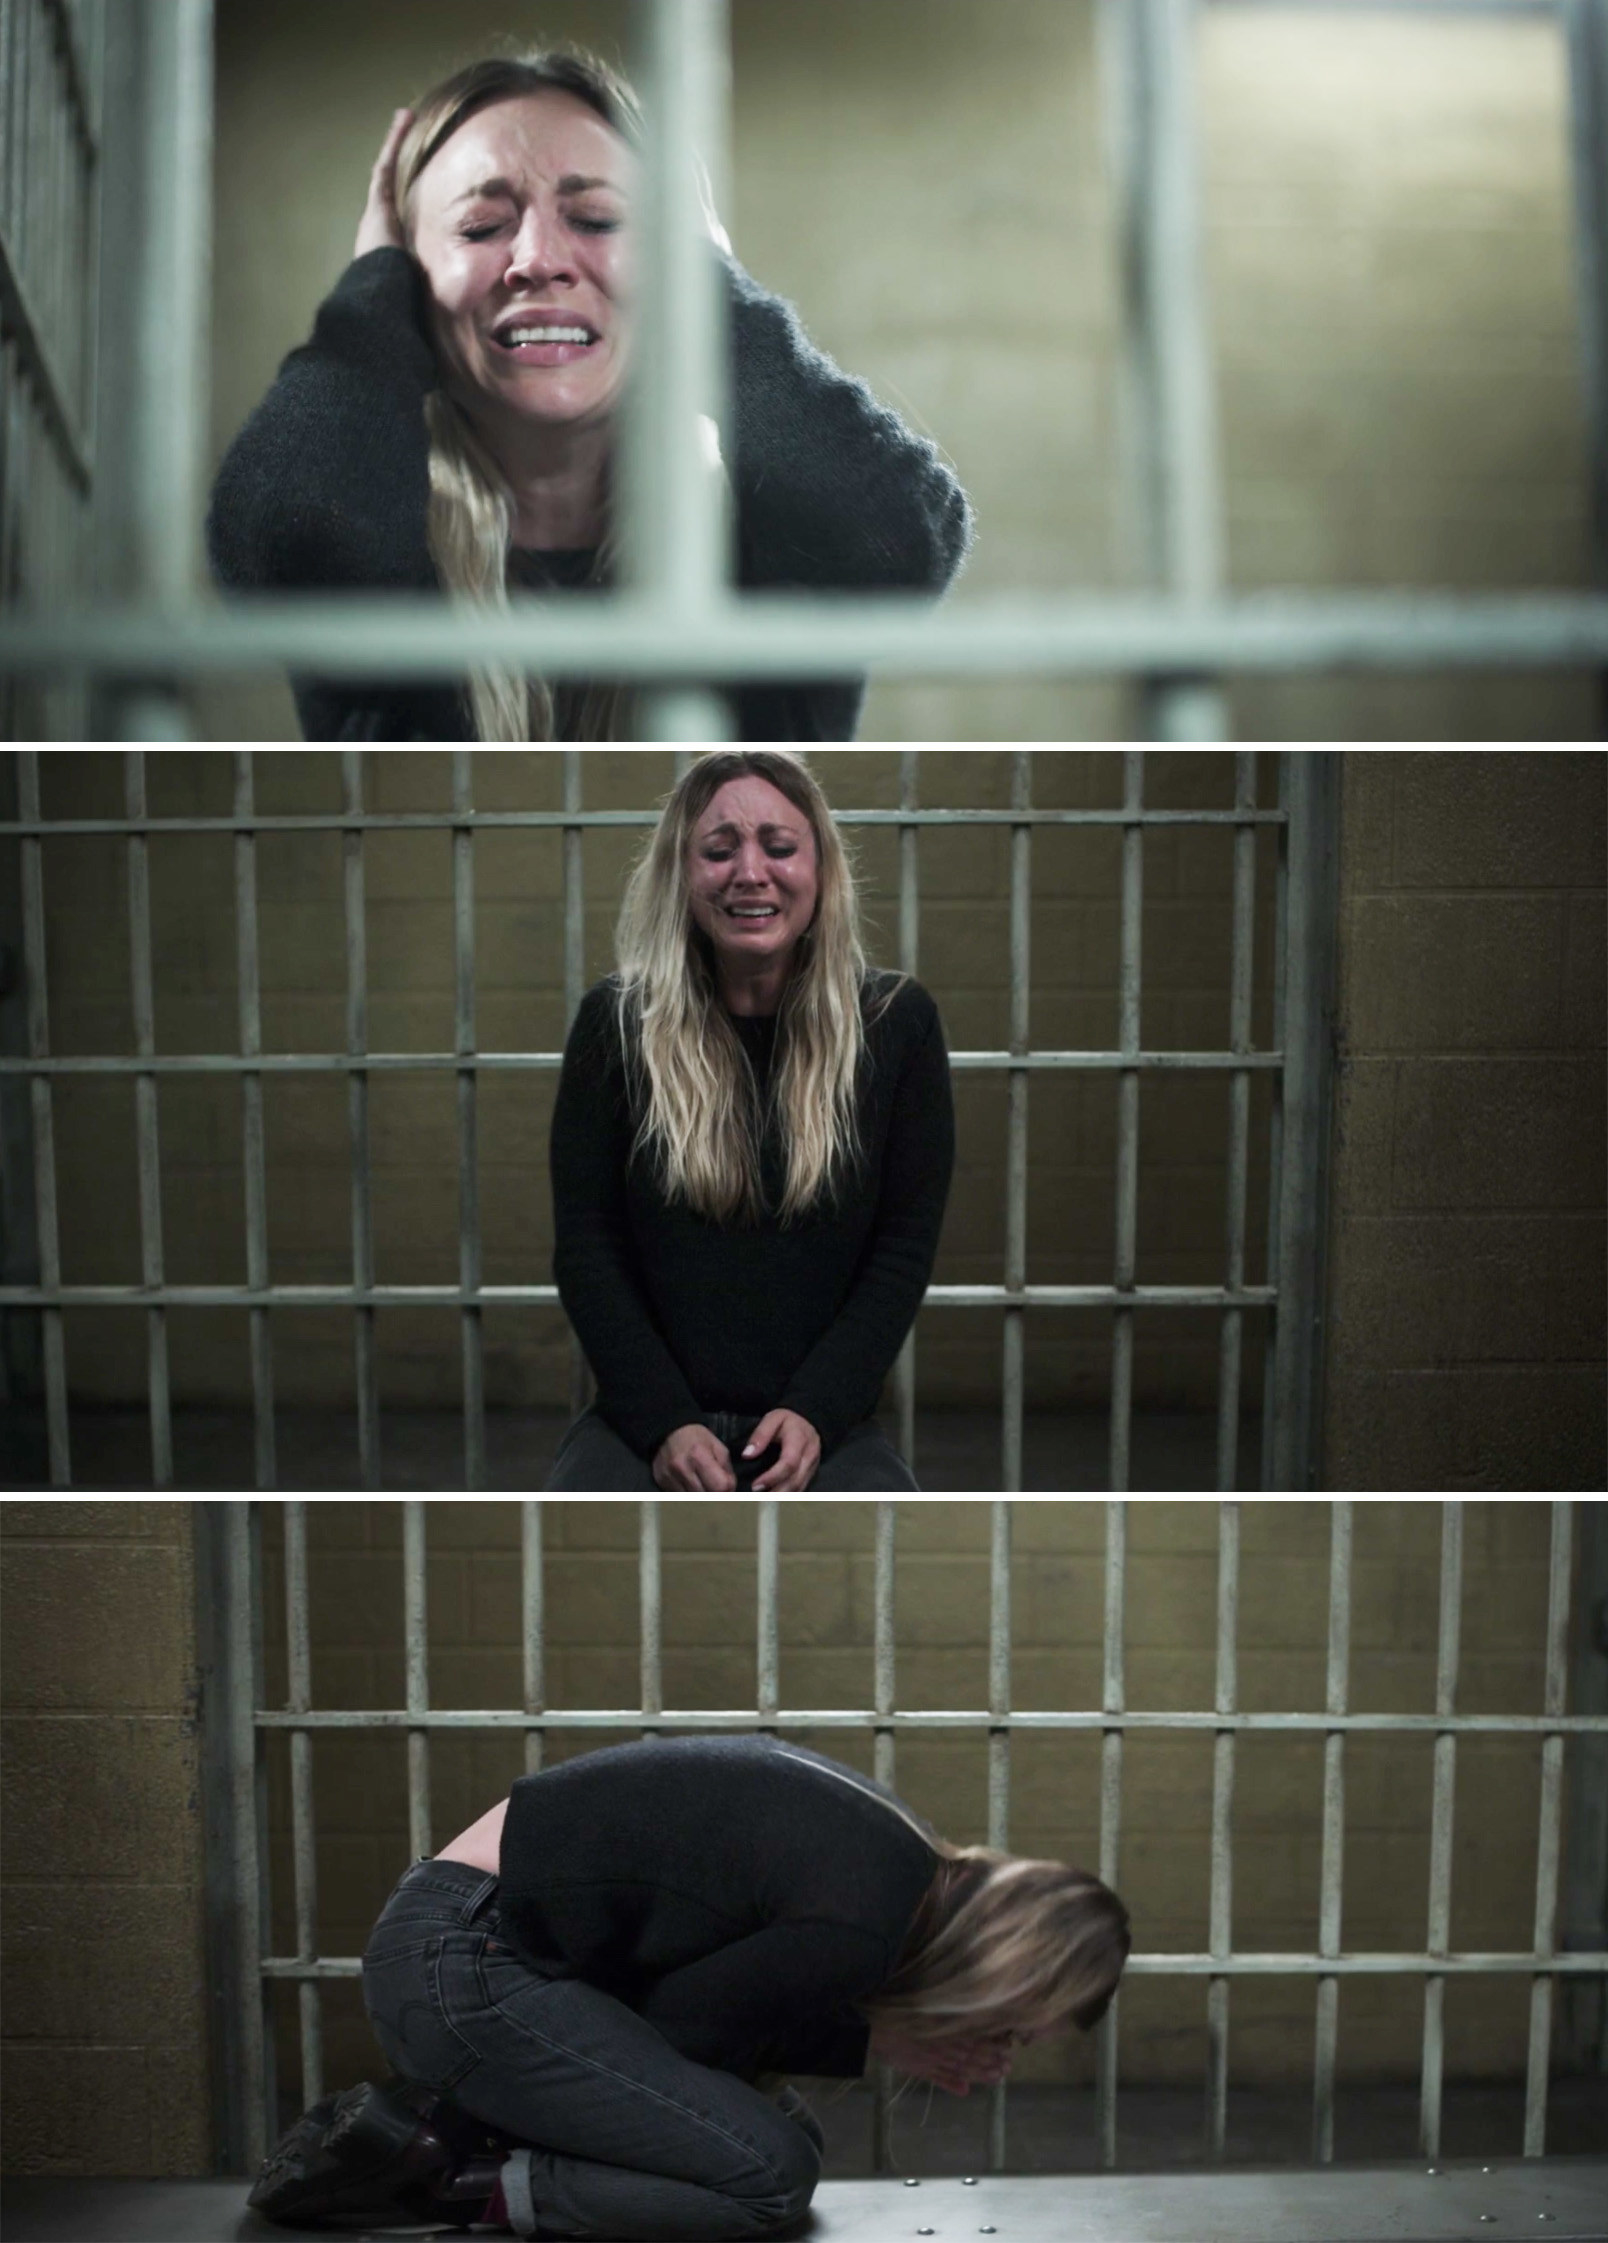 Cassie weeping in a jail cell